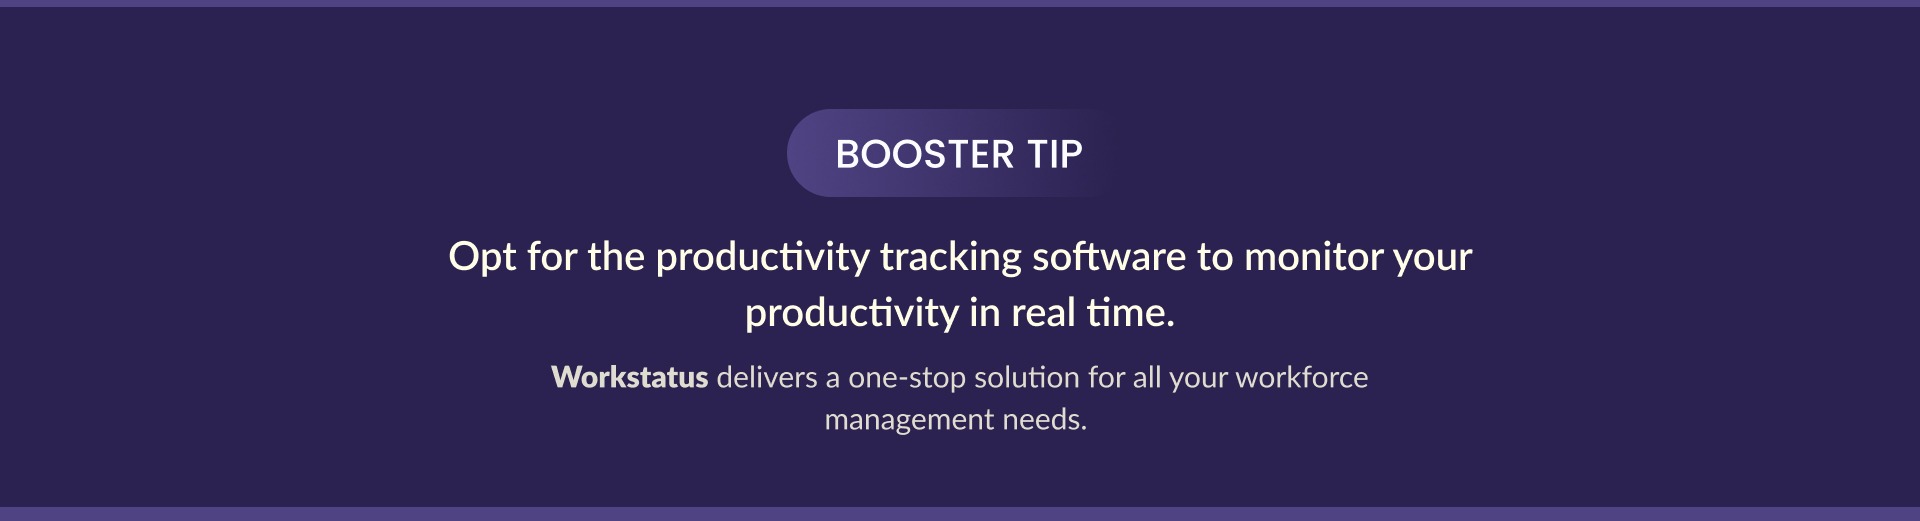 booster tip